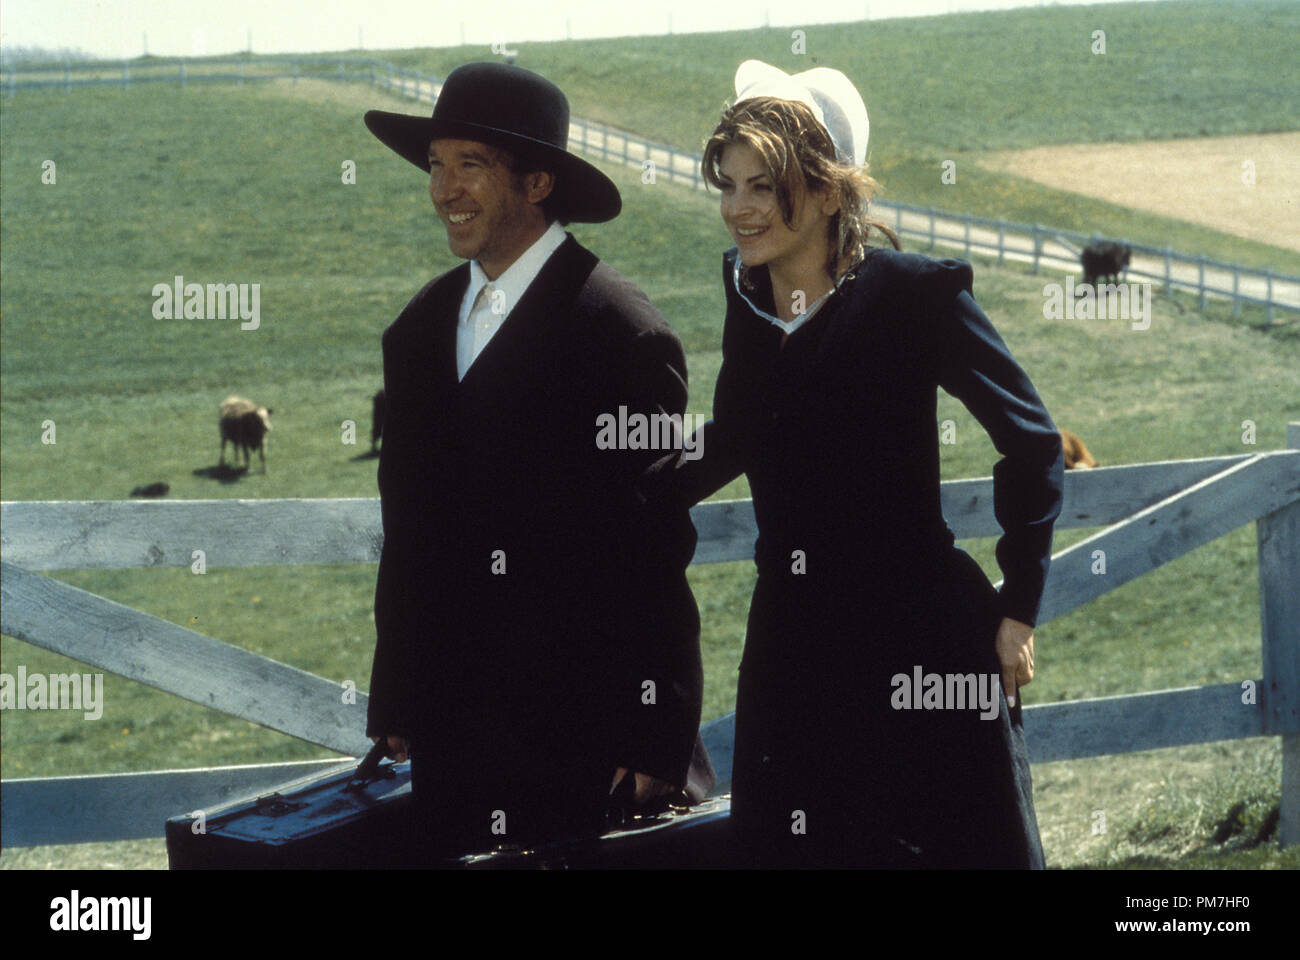 Film Still from 'For Richer or Poorer' Tim Allen, Kirstie Alley © 1997 Universal Pictures Photo Credit: Demmie Todd   File Reference # 31013341THA  For Editorial Use Only - All Rights Reserved Stock Photo